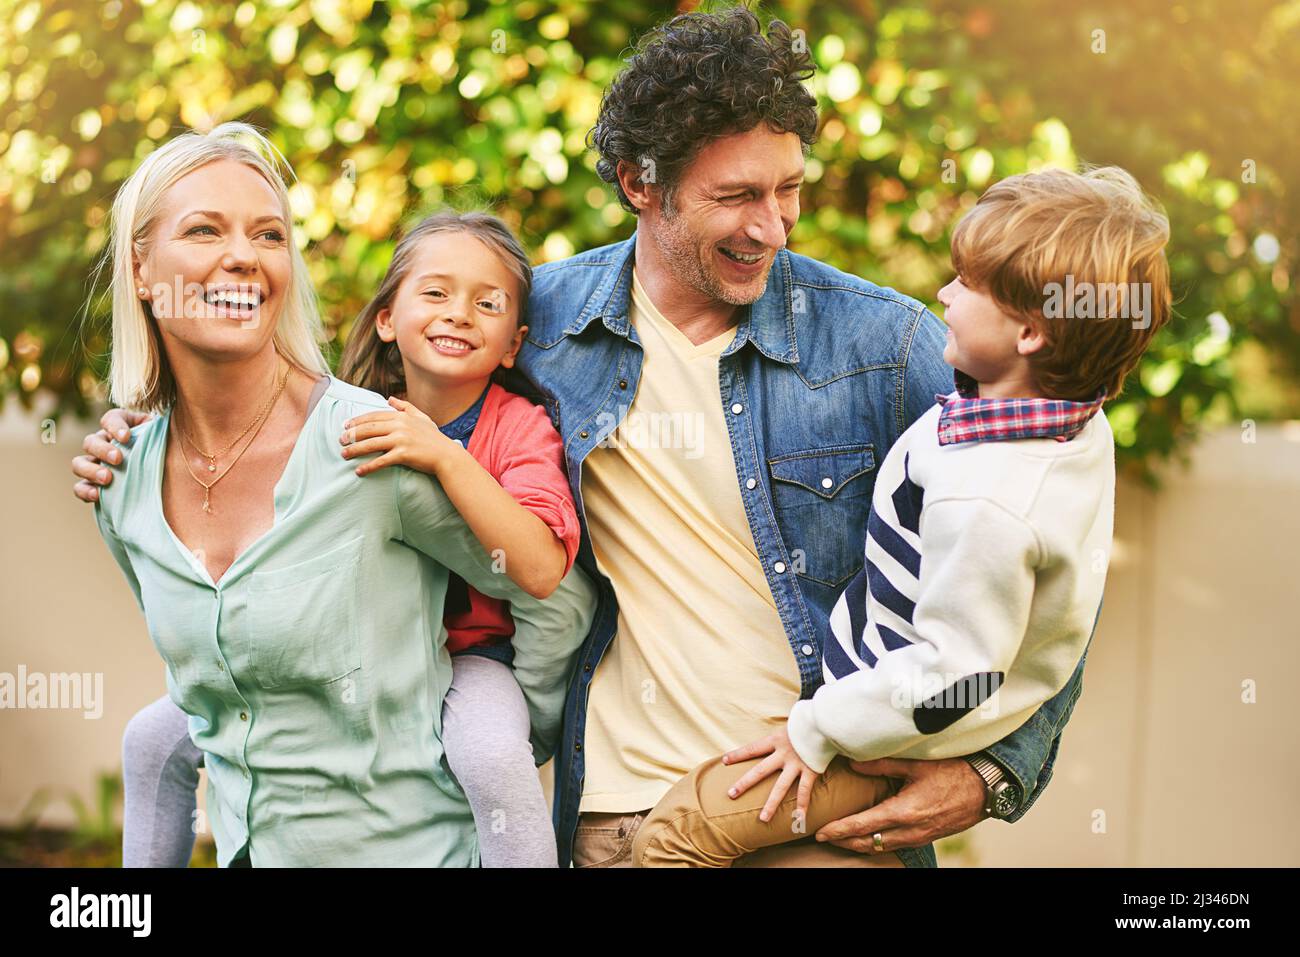 Making some fun memories together. Cropped shot of a happy family spending quality time together outside. Stock Photo